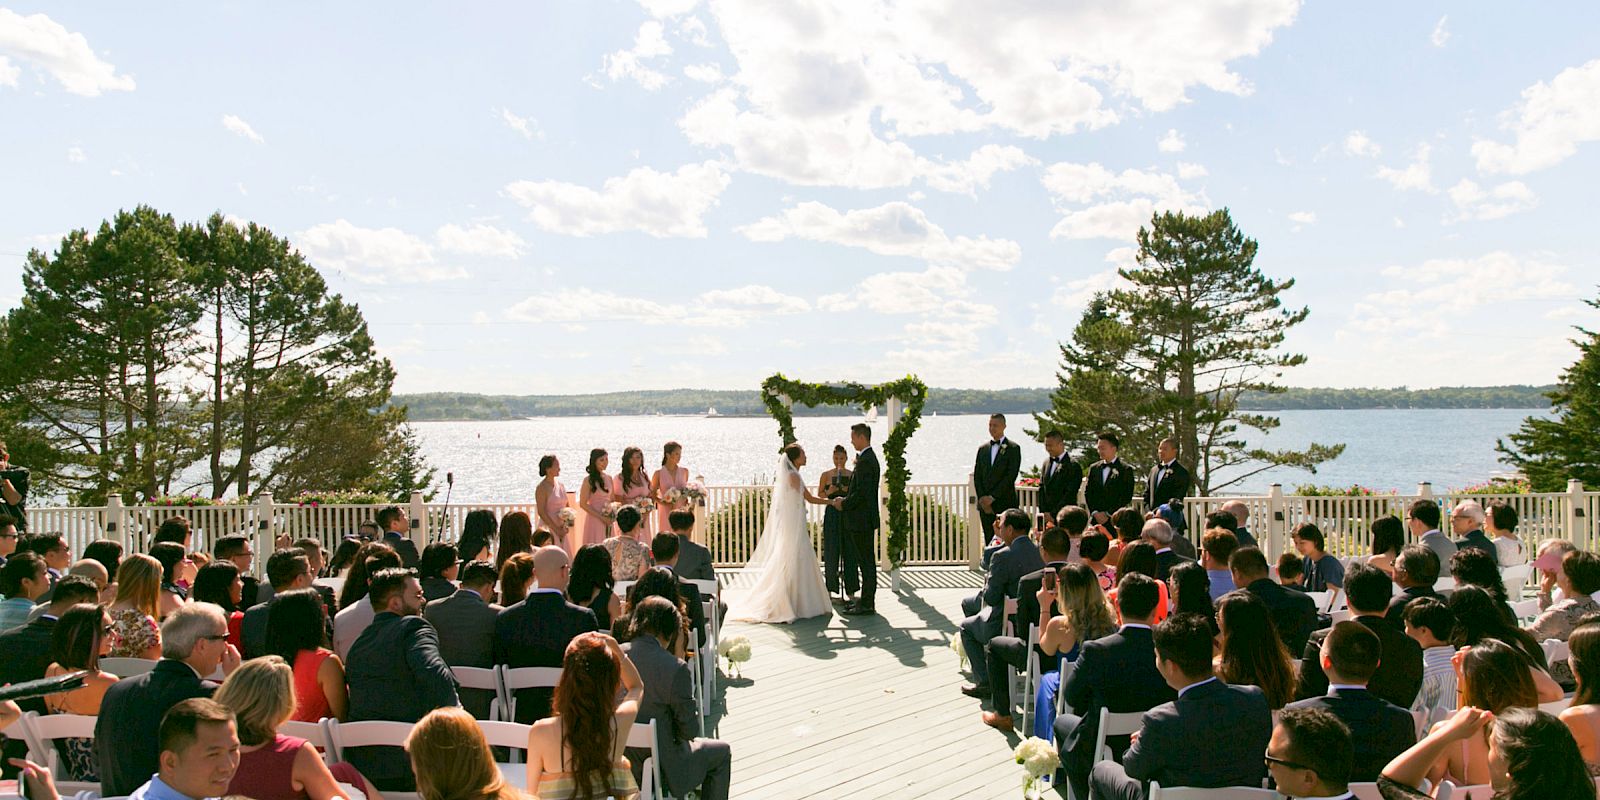 A wedding ceremony is taking place outdoors with guests seated, officiant, wedding party, and couple under an arch by a scenic lake.